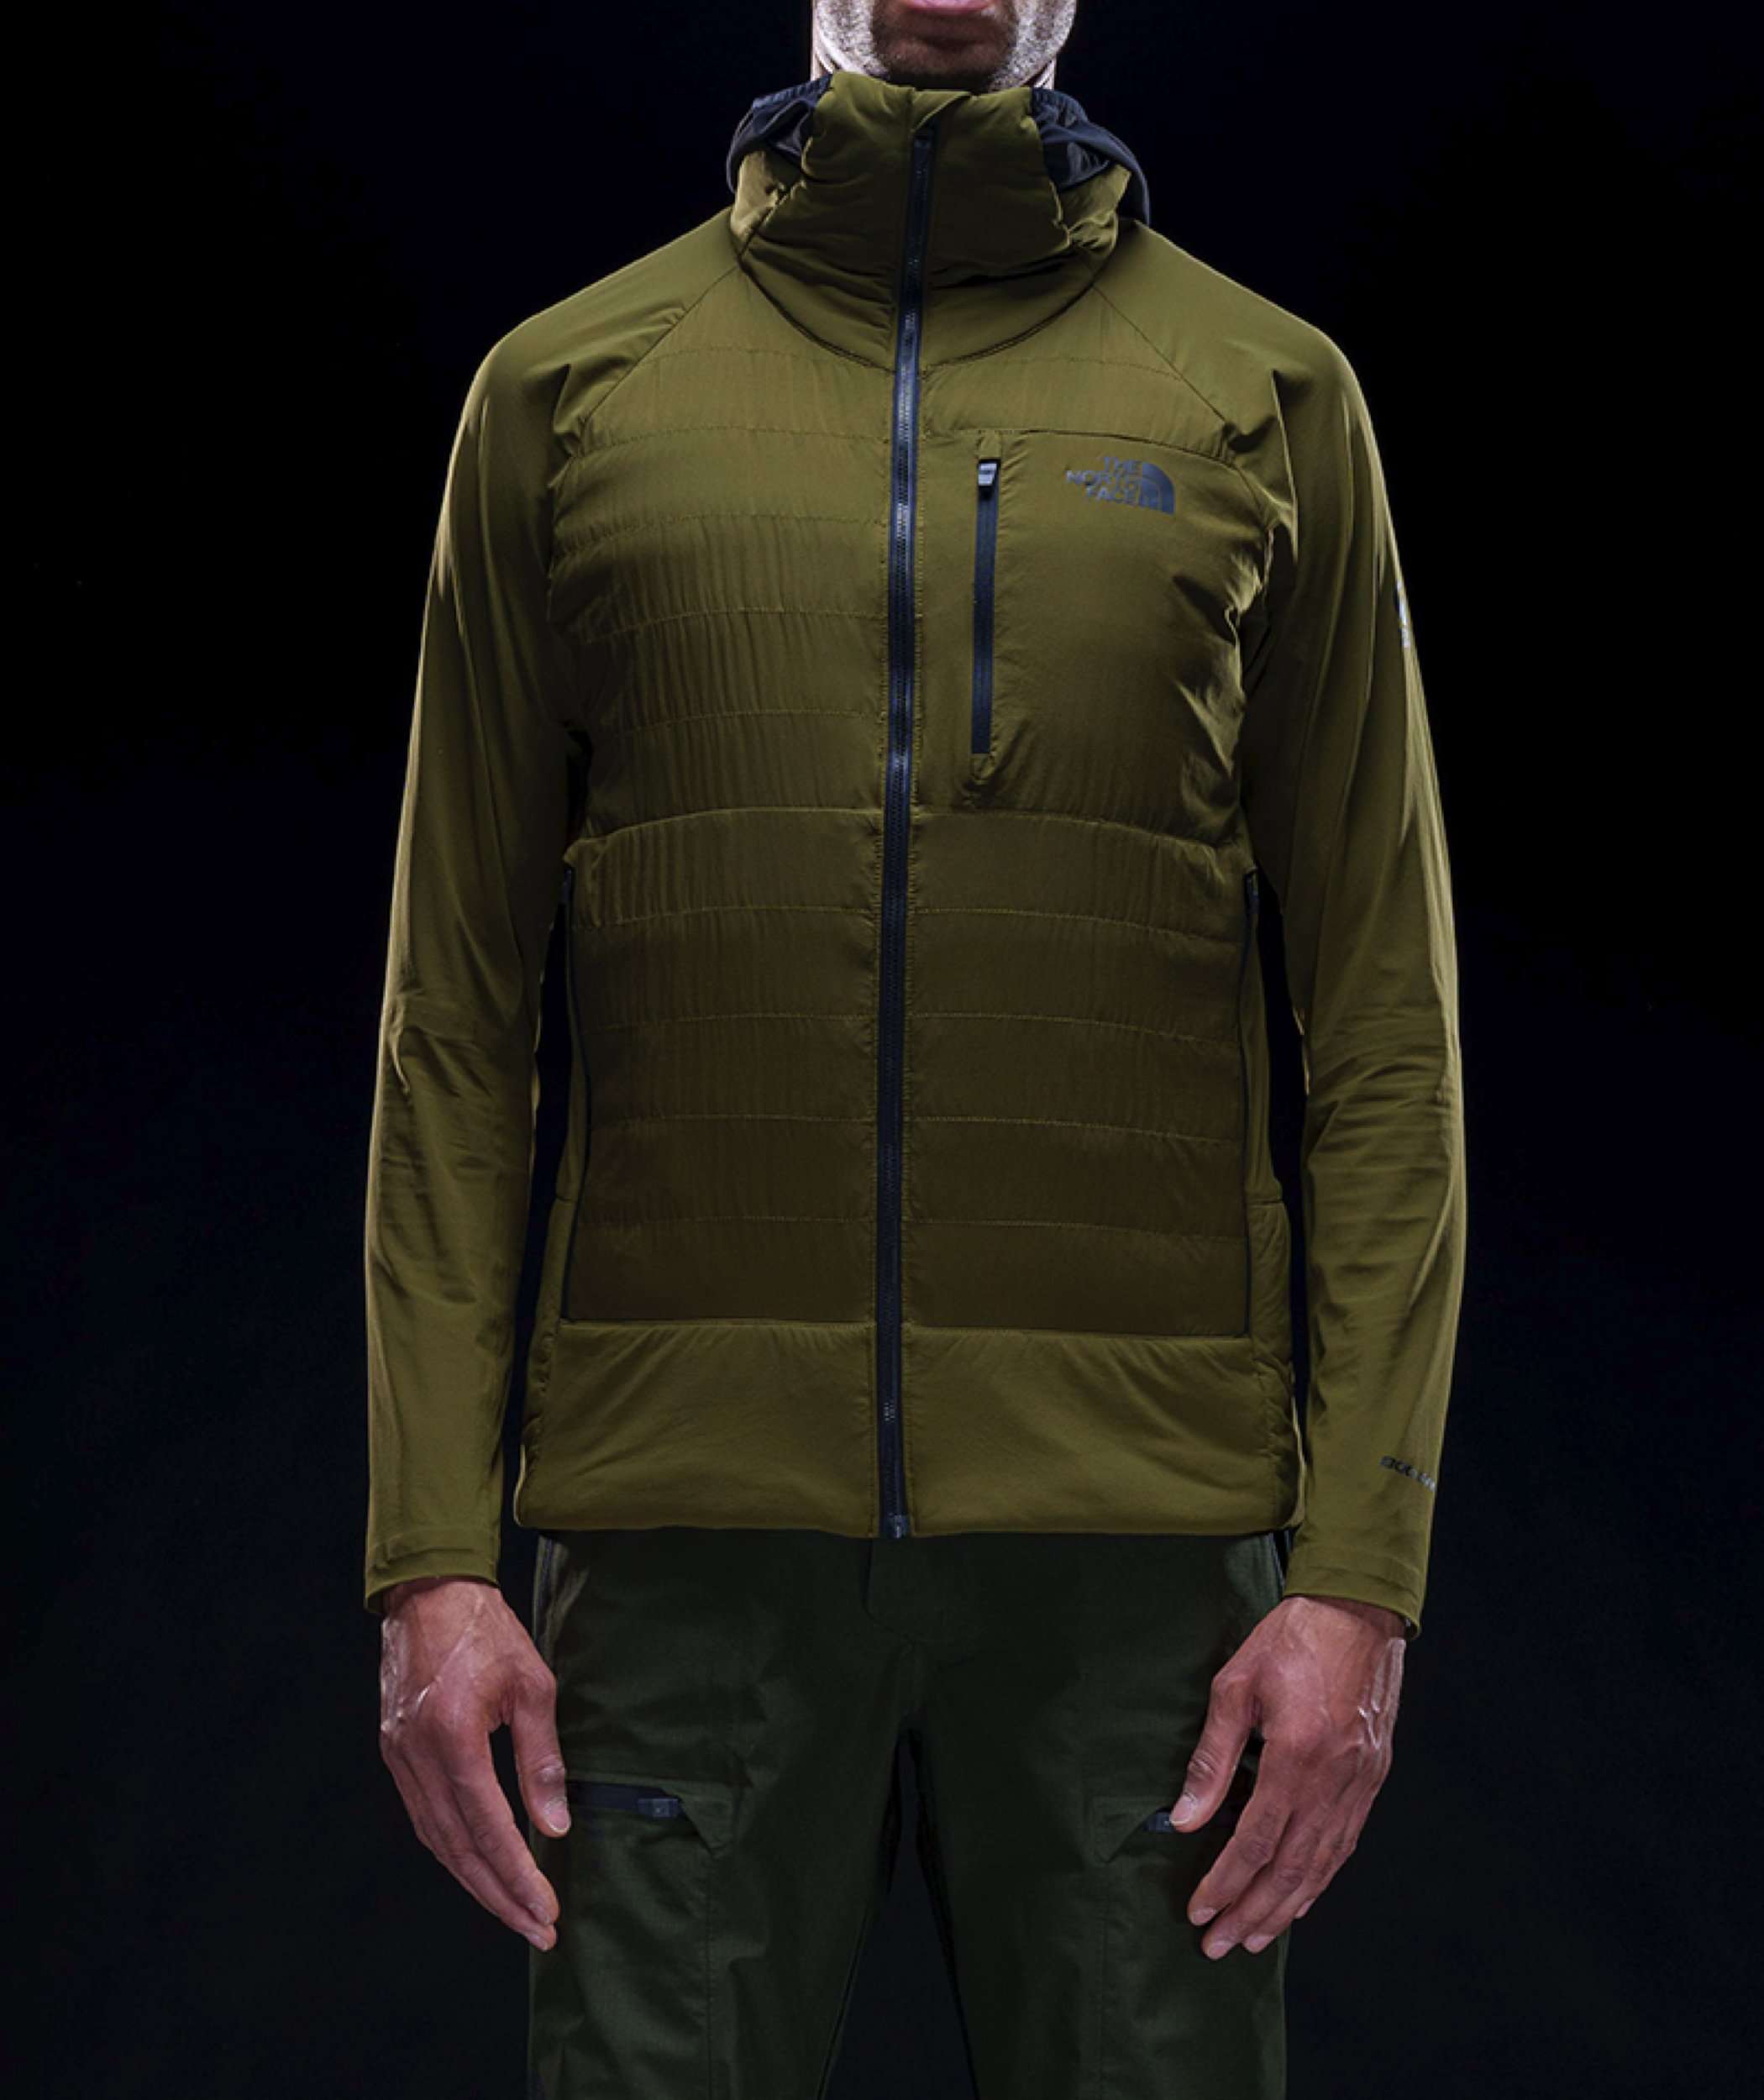 A person wears the Steep 50/50 Down Jacket. A jacket with layers of warmth, including a more ergonomically-designed hood.